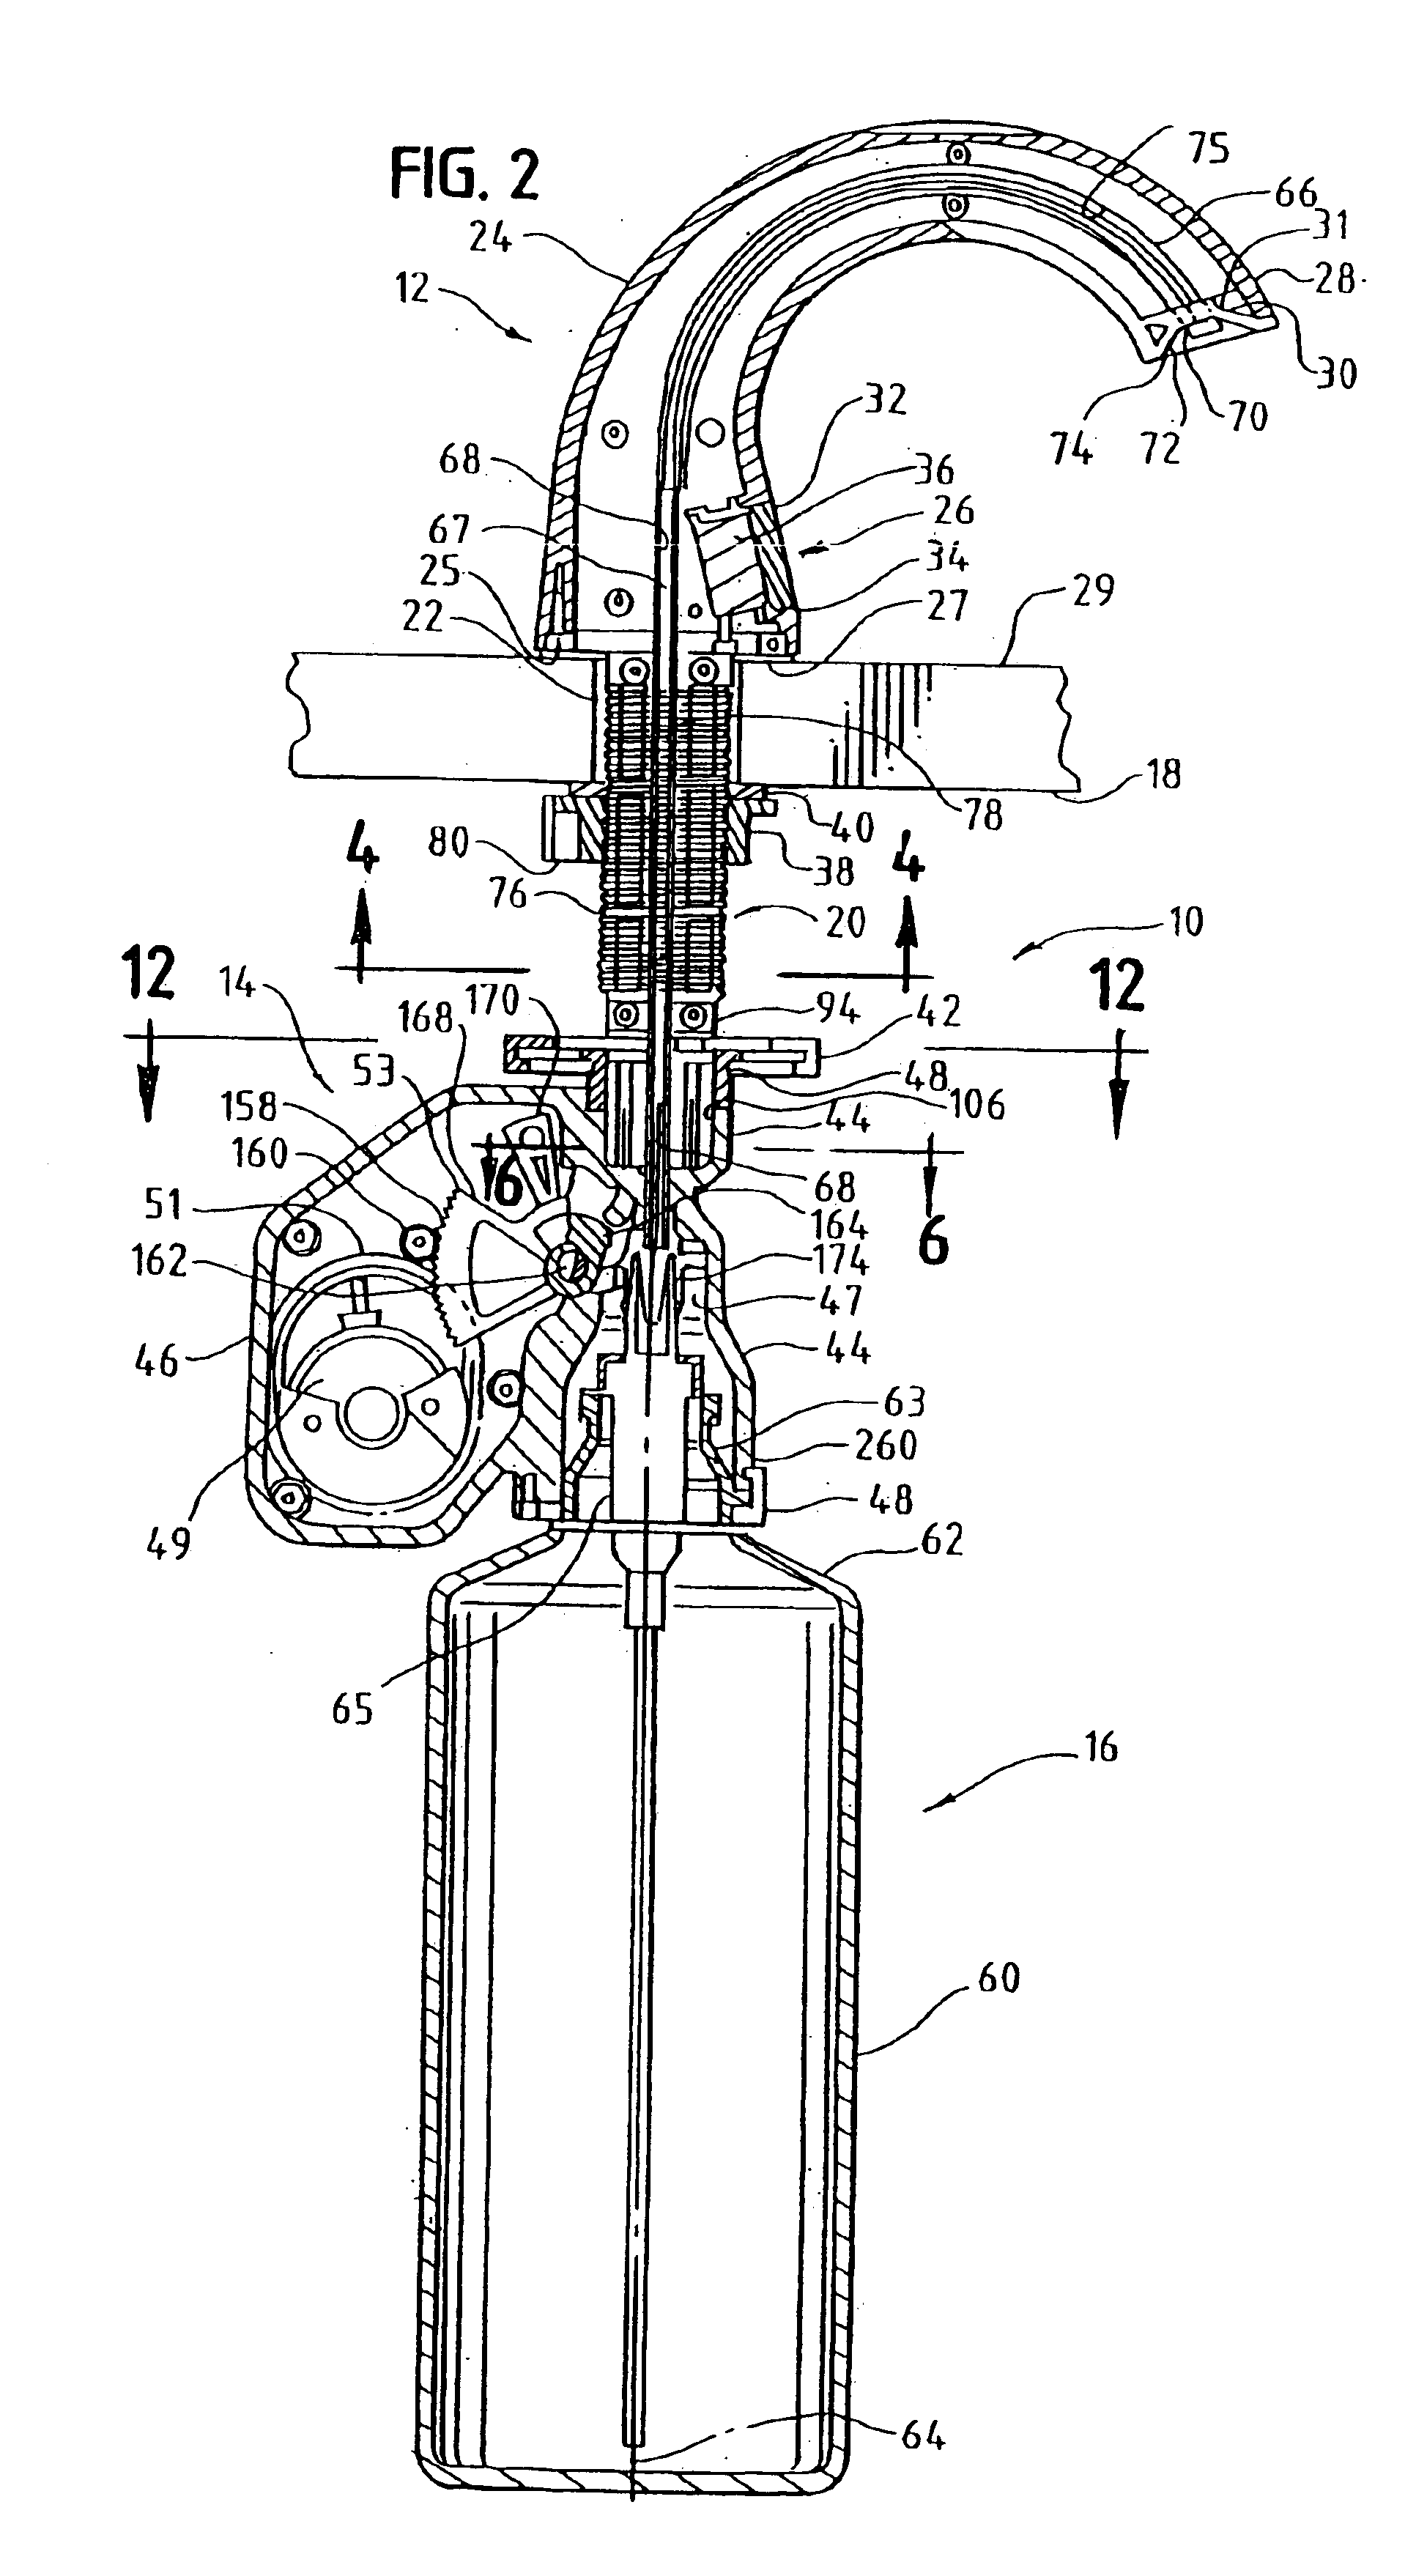 System and method for dispensing soap